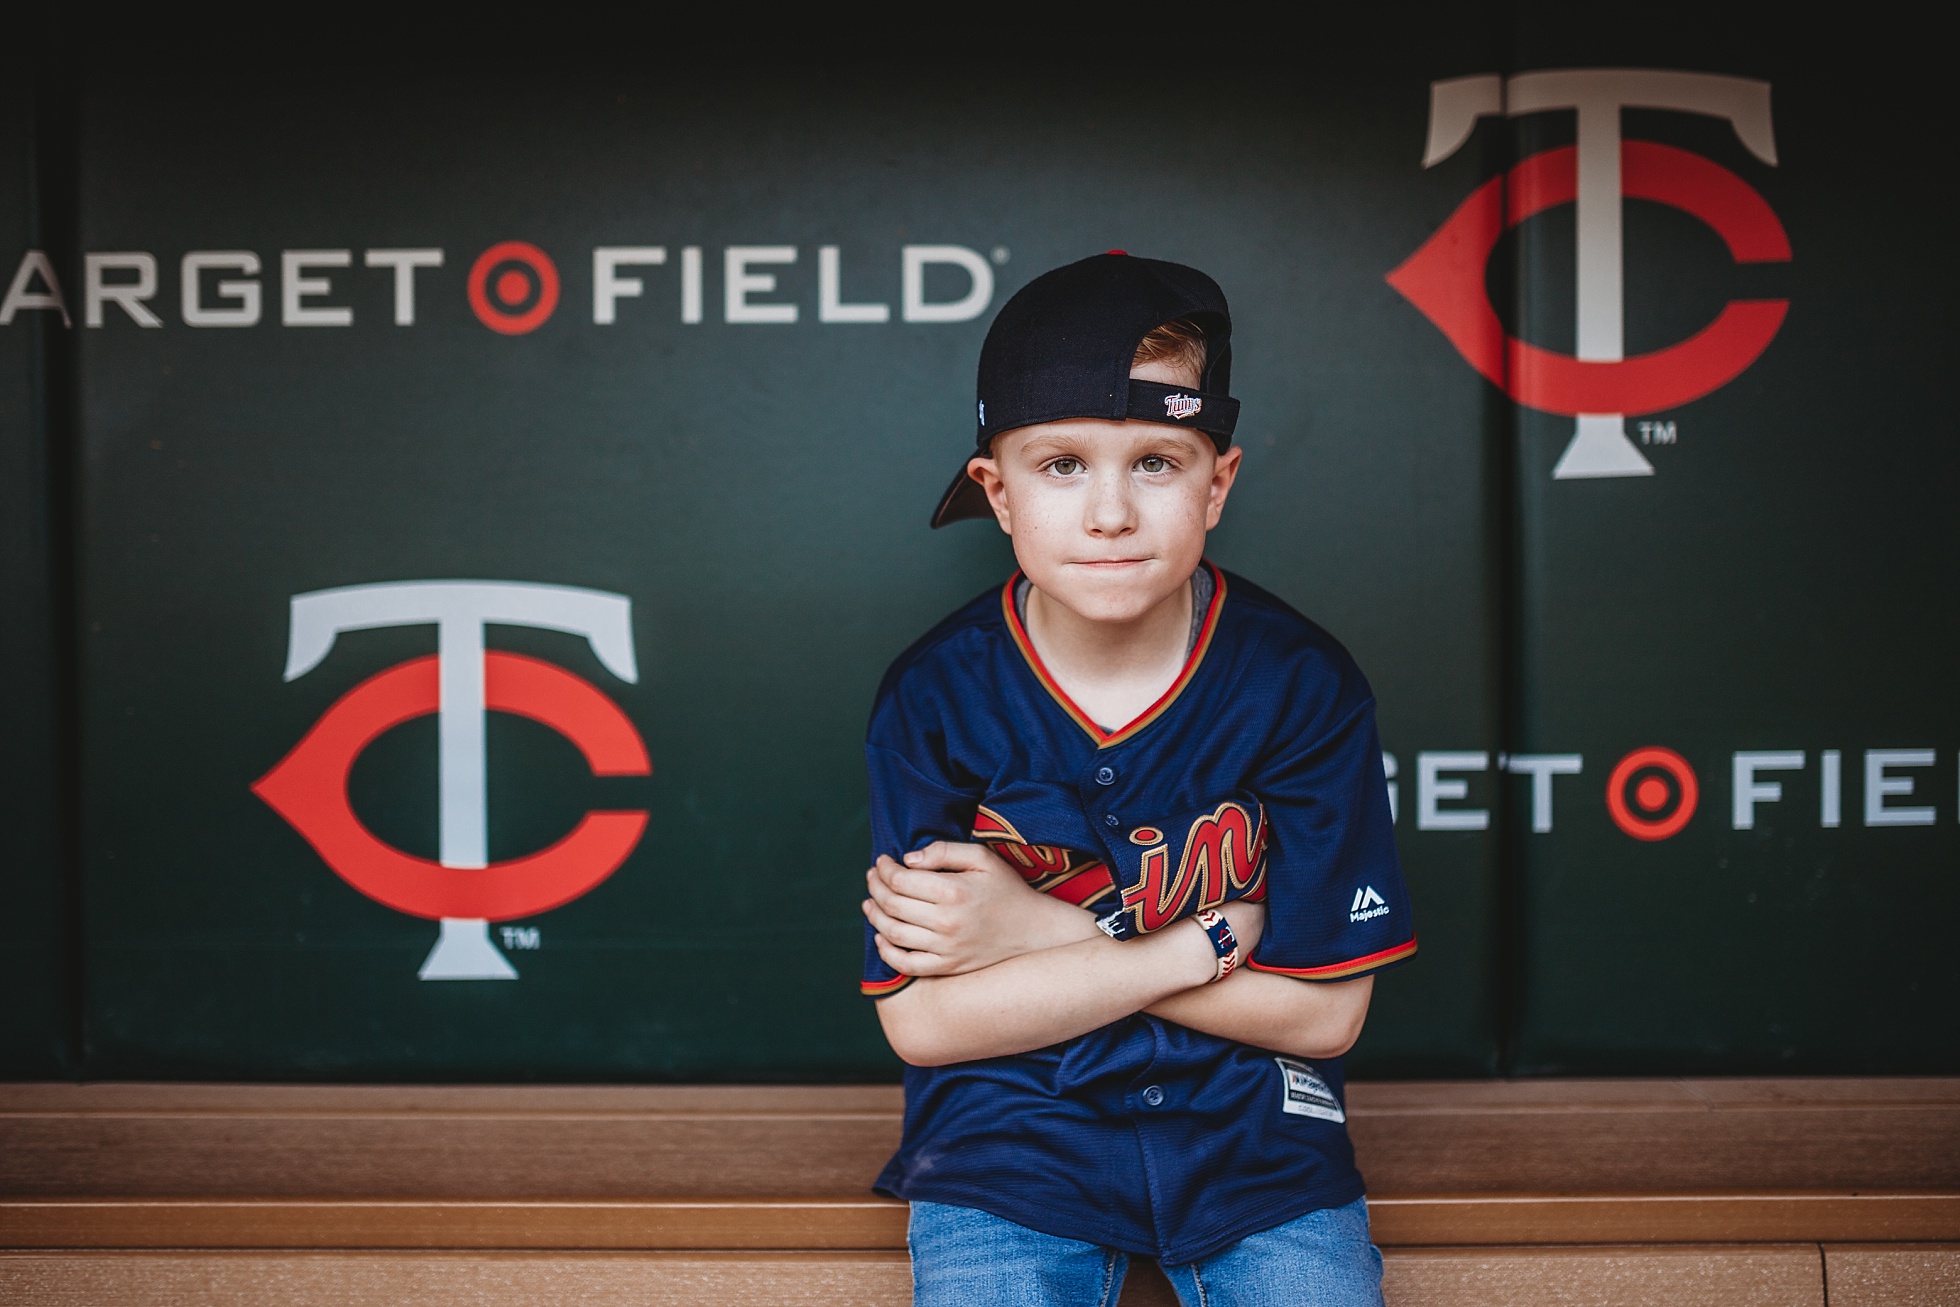 boy sitting in target field dugout with hat on backwards